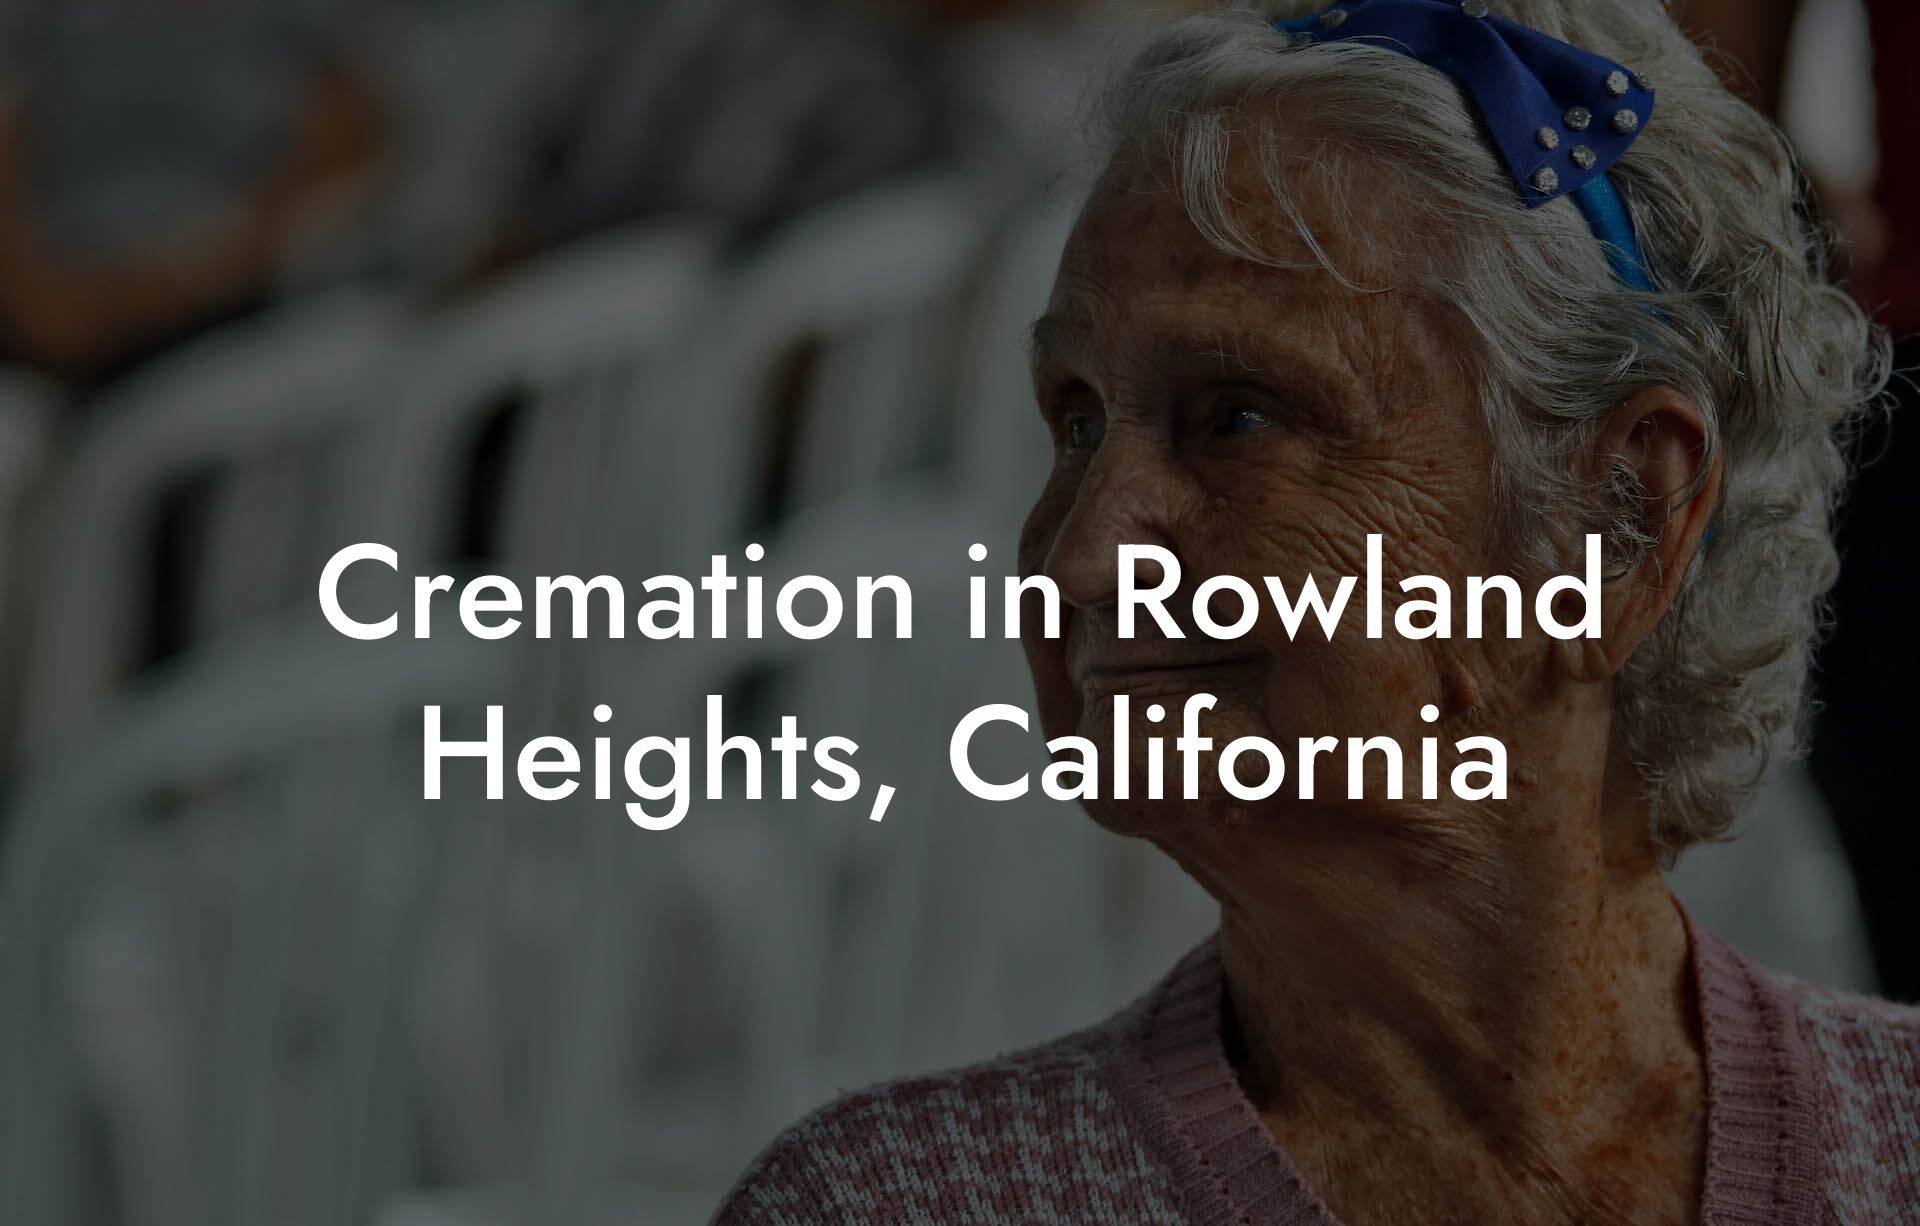 Cremation in Rowland Heights, California